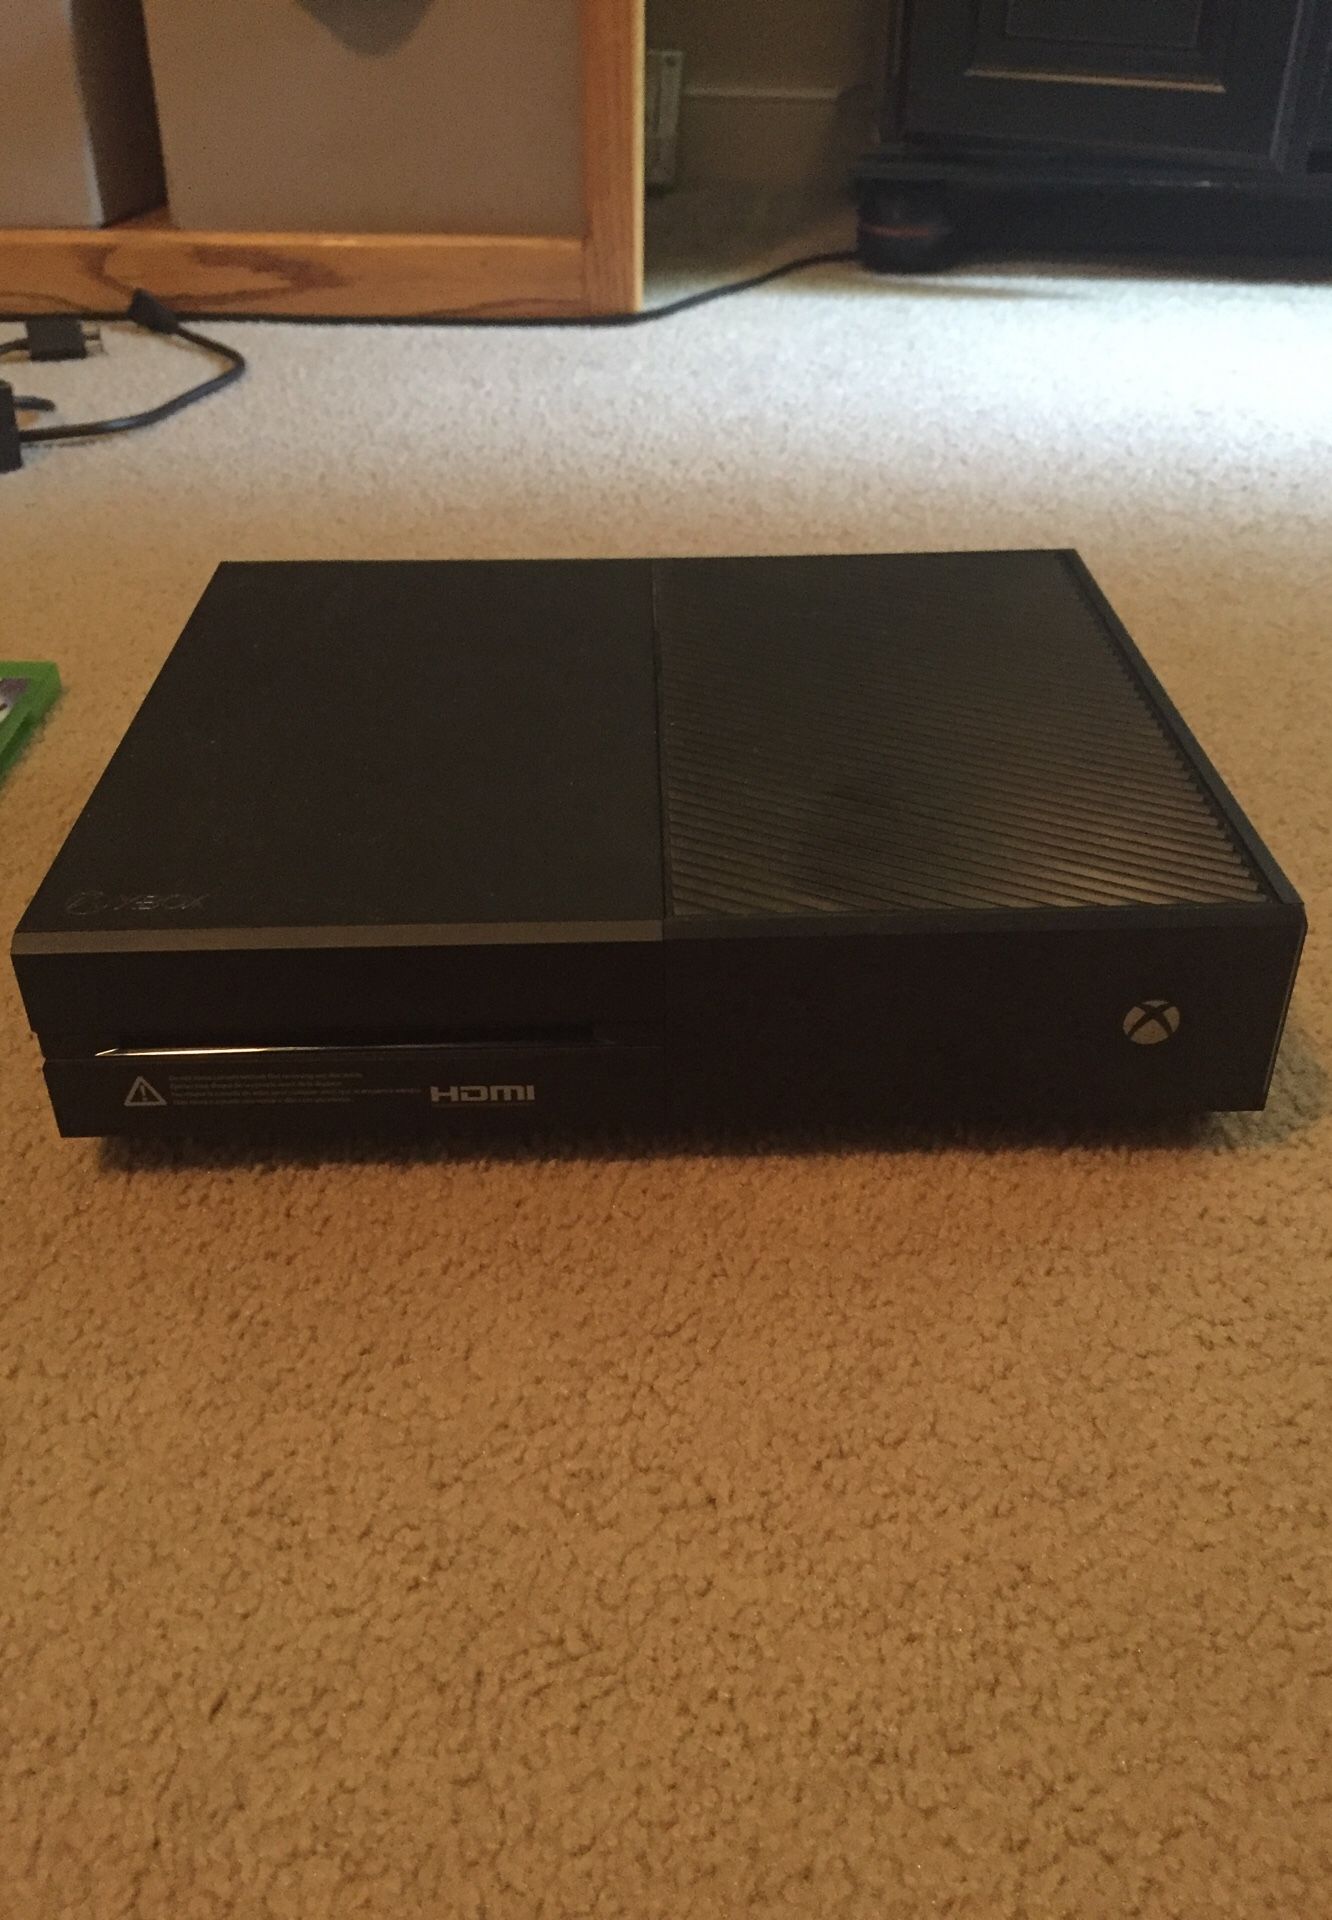 Xbox One with games and controllers